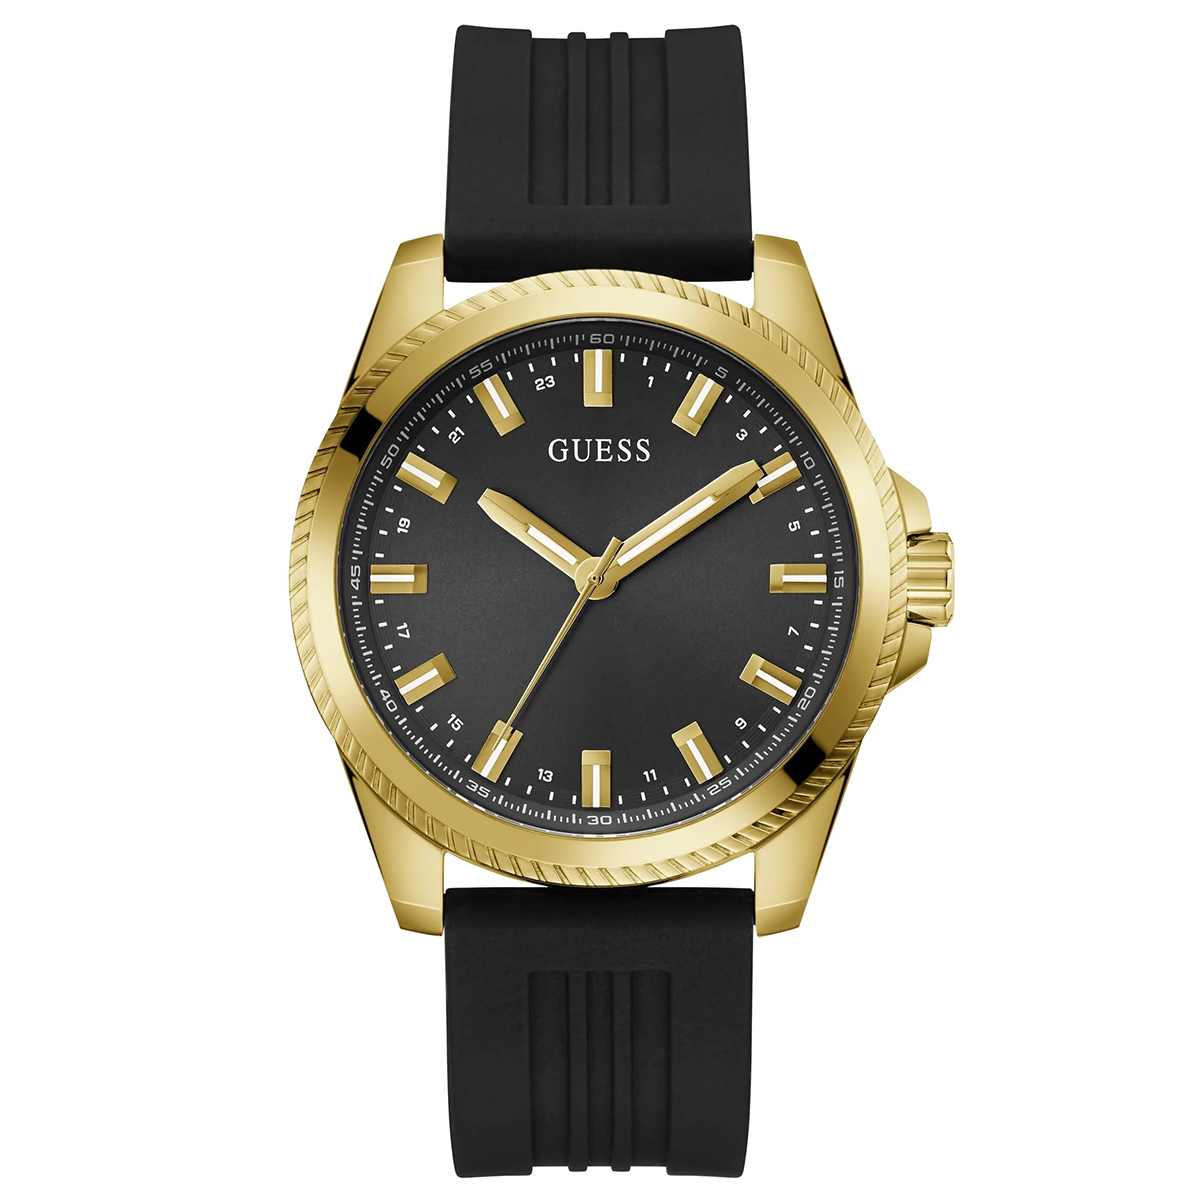 MONTRE GUESS HOMME SIMPLE SILICONE